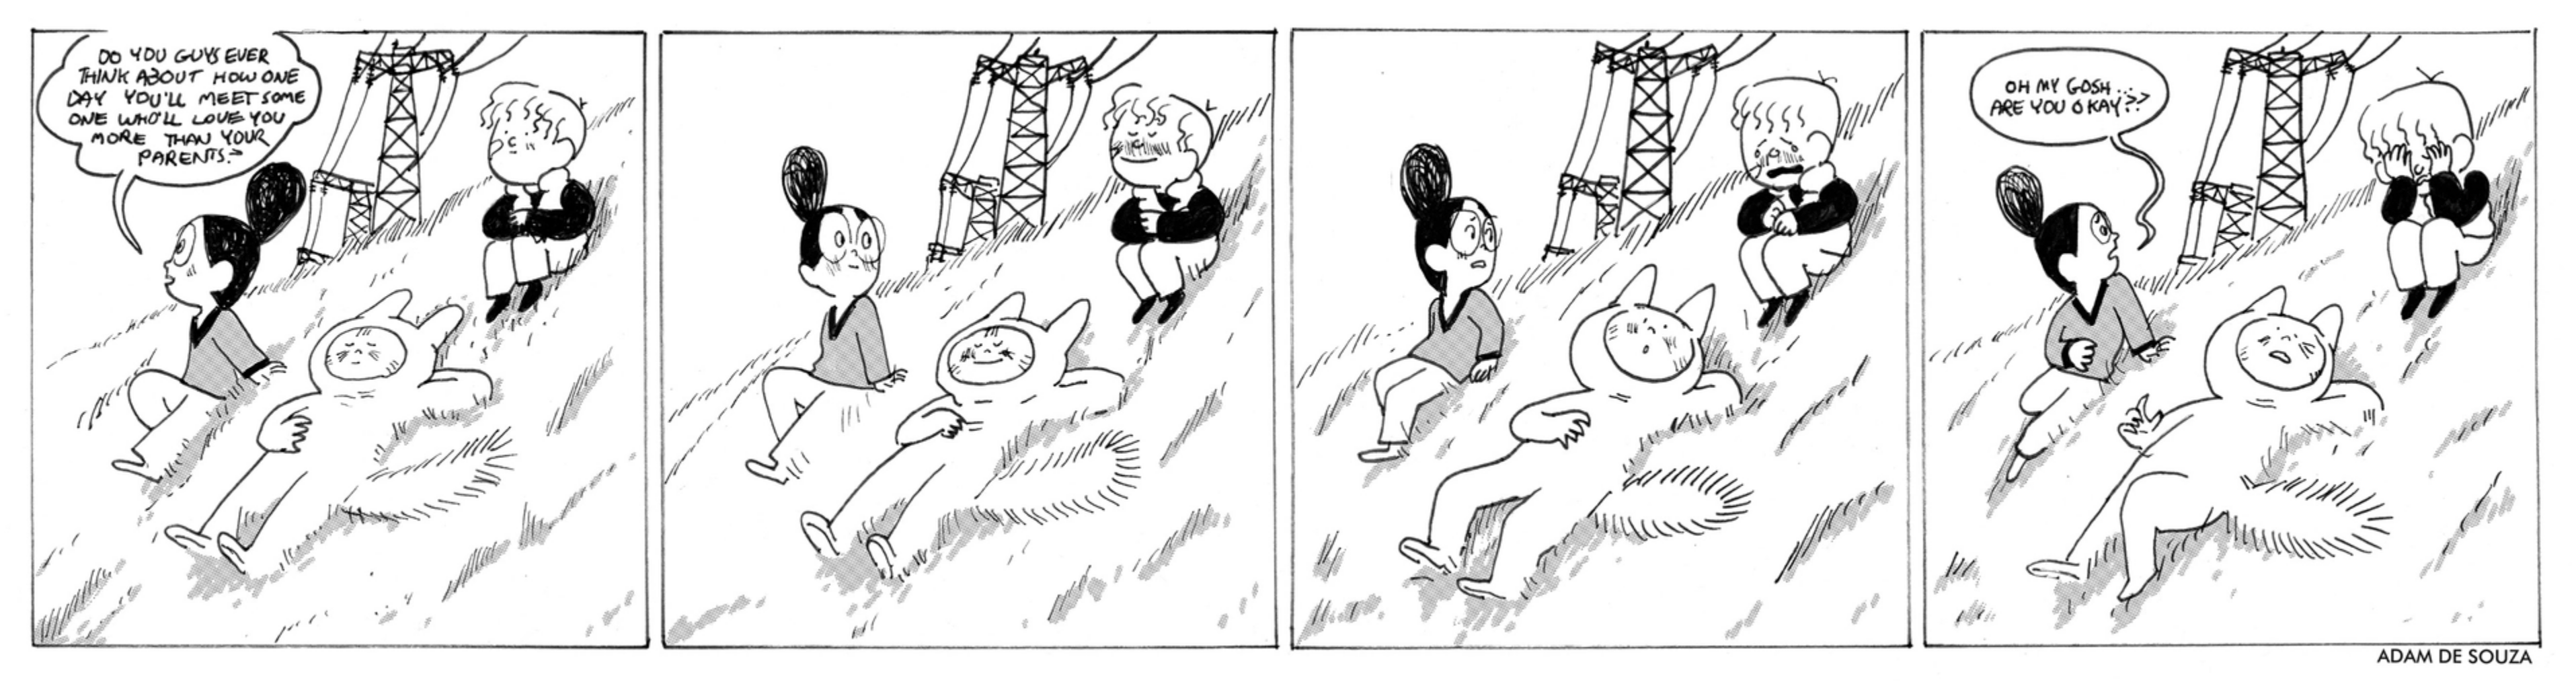 Four-panel comic showing three kids on a hill. In the first, one kid with their hair in a big bun and glasses says, "do you guys ever think about how one day you'll meet someone who'll love you more than your parents?" In the following two panels, the other two kids go from happy to upset. In the final panel, the first character says "Oh my god are you okay??" as their friends cry in anguish.